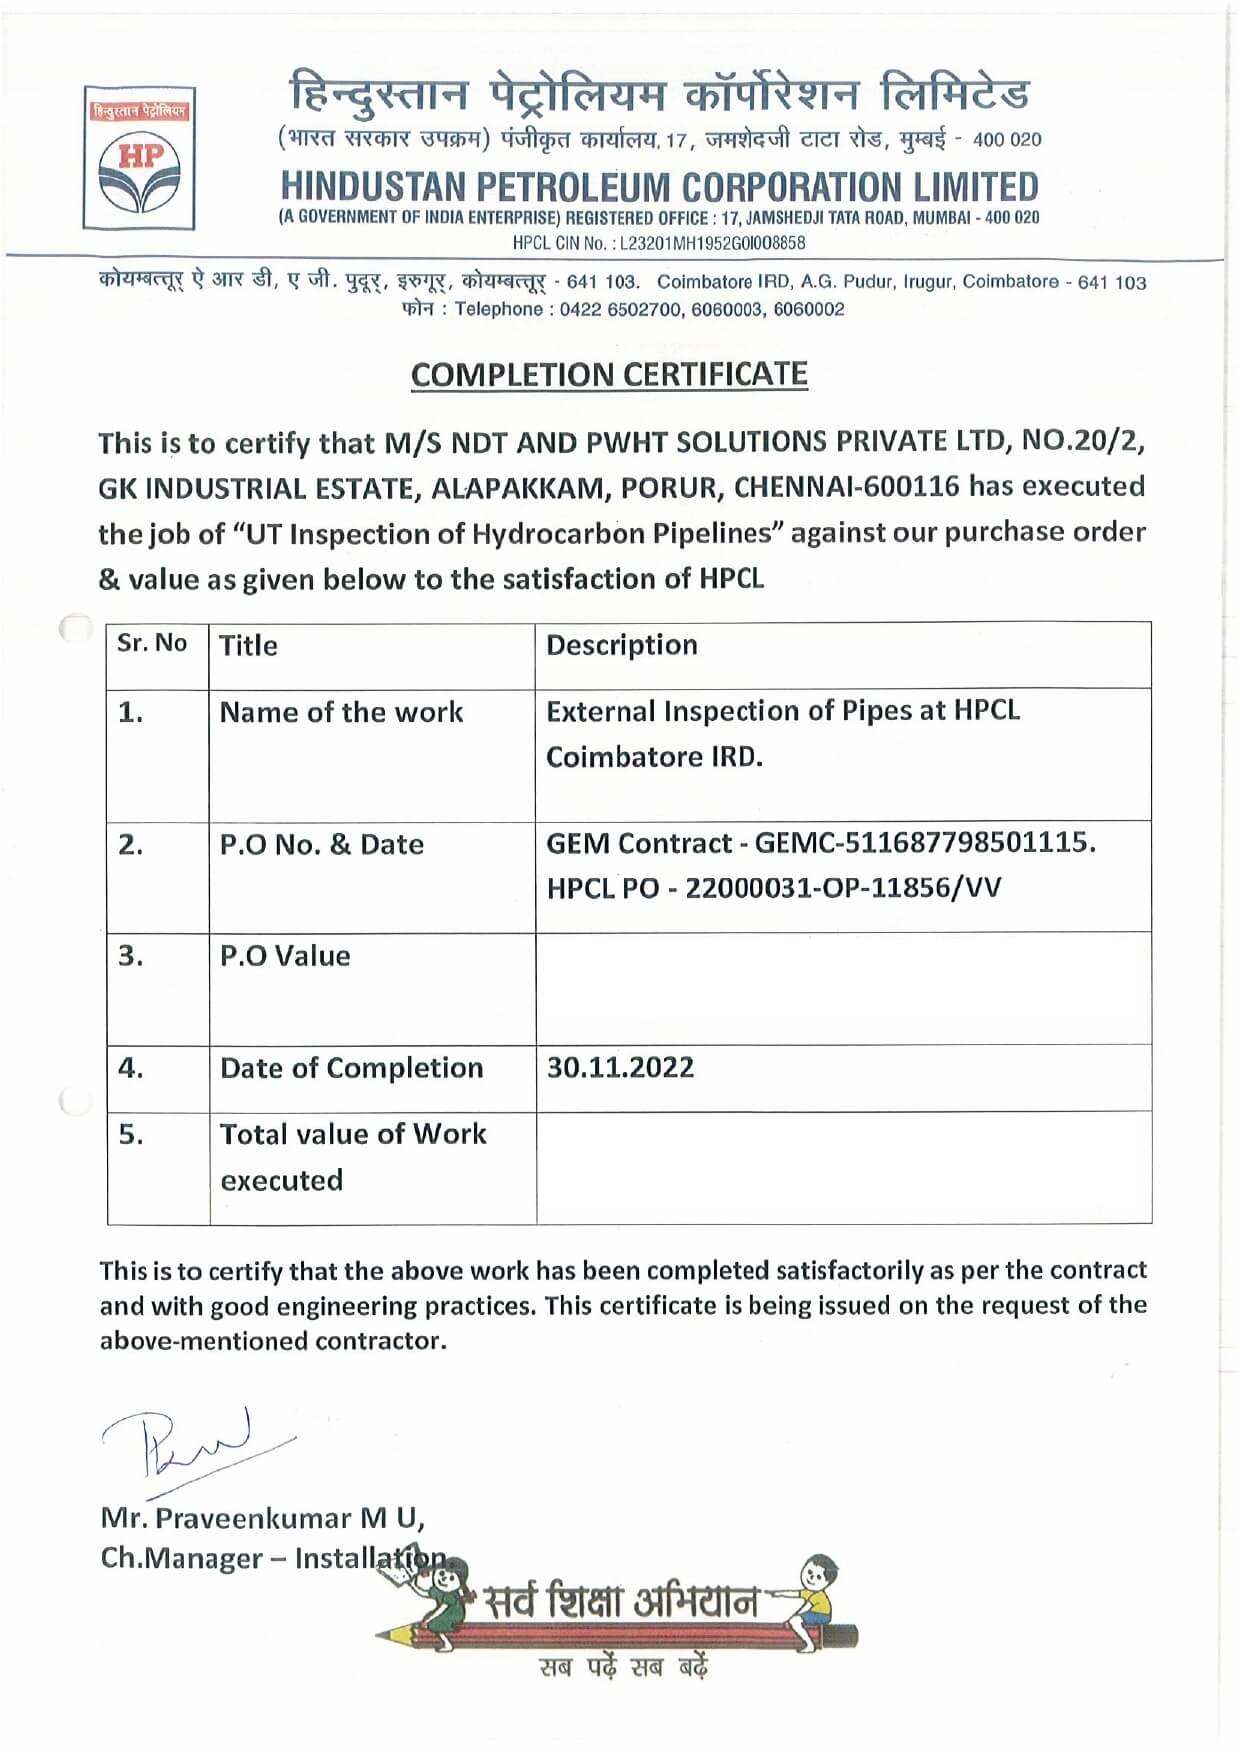 Project Completion Certificate for Ultrasonic testing of Pipeline-Hindustan Petroleum Corporation Limited,